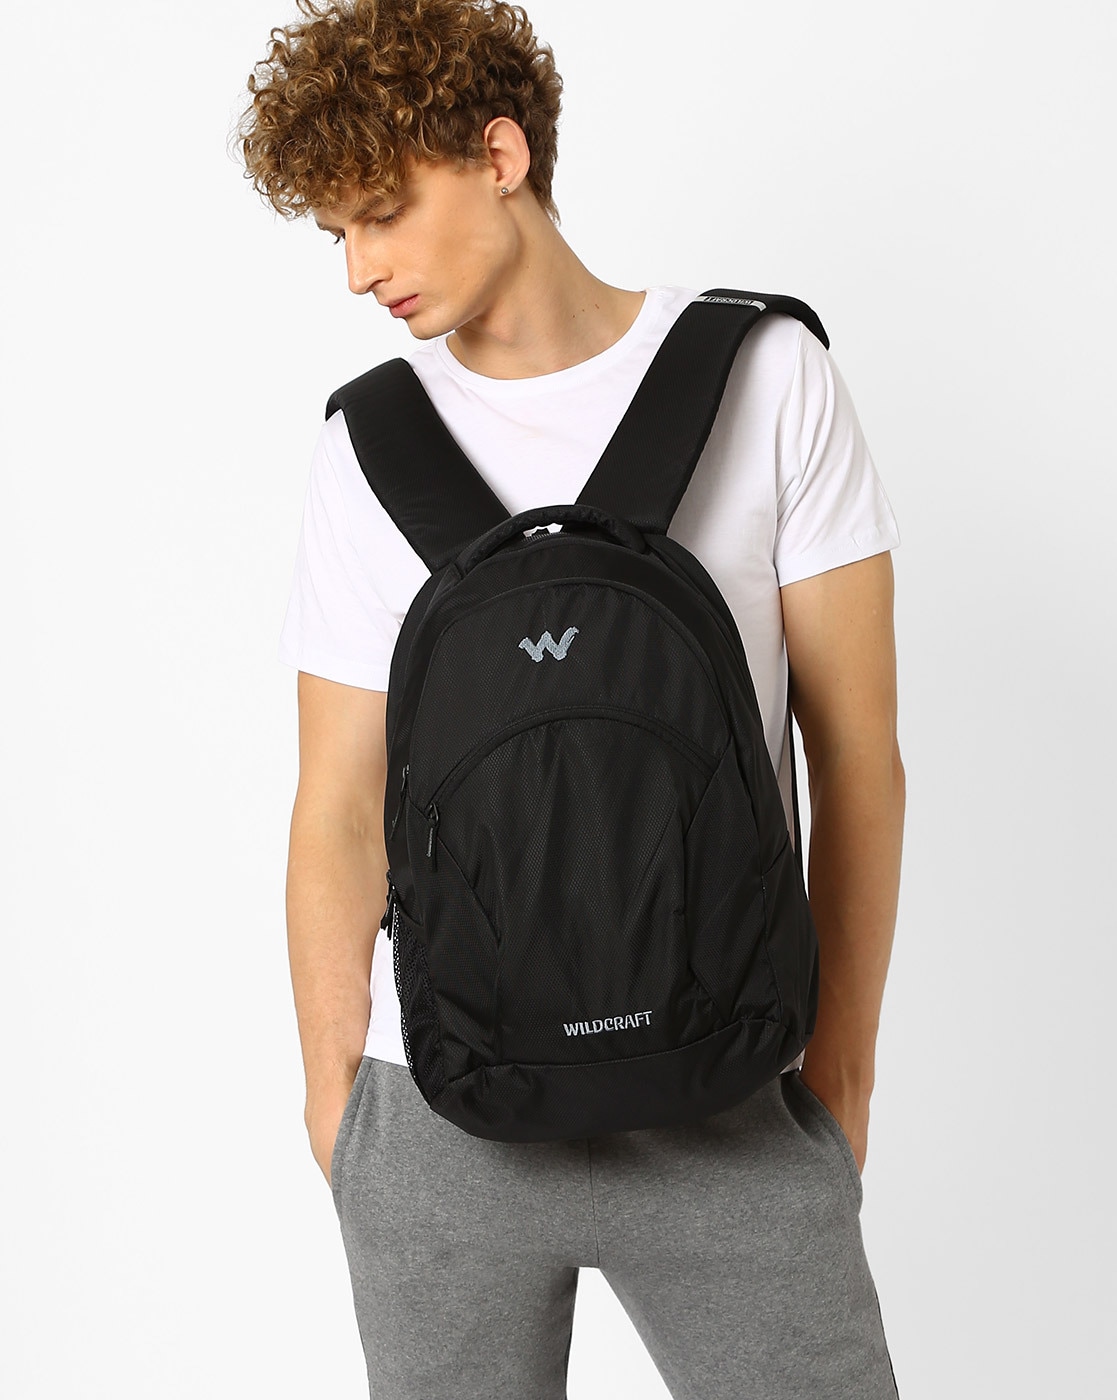 Buy Wildcraft Unisex Zipper Closure Laptop Backpack (Black_Free Size) at  Amazon.in